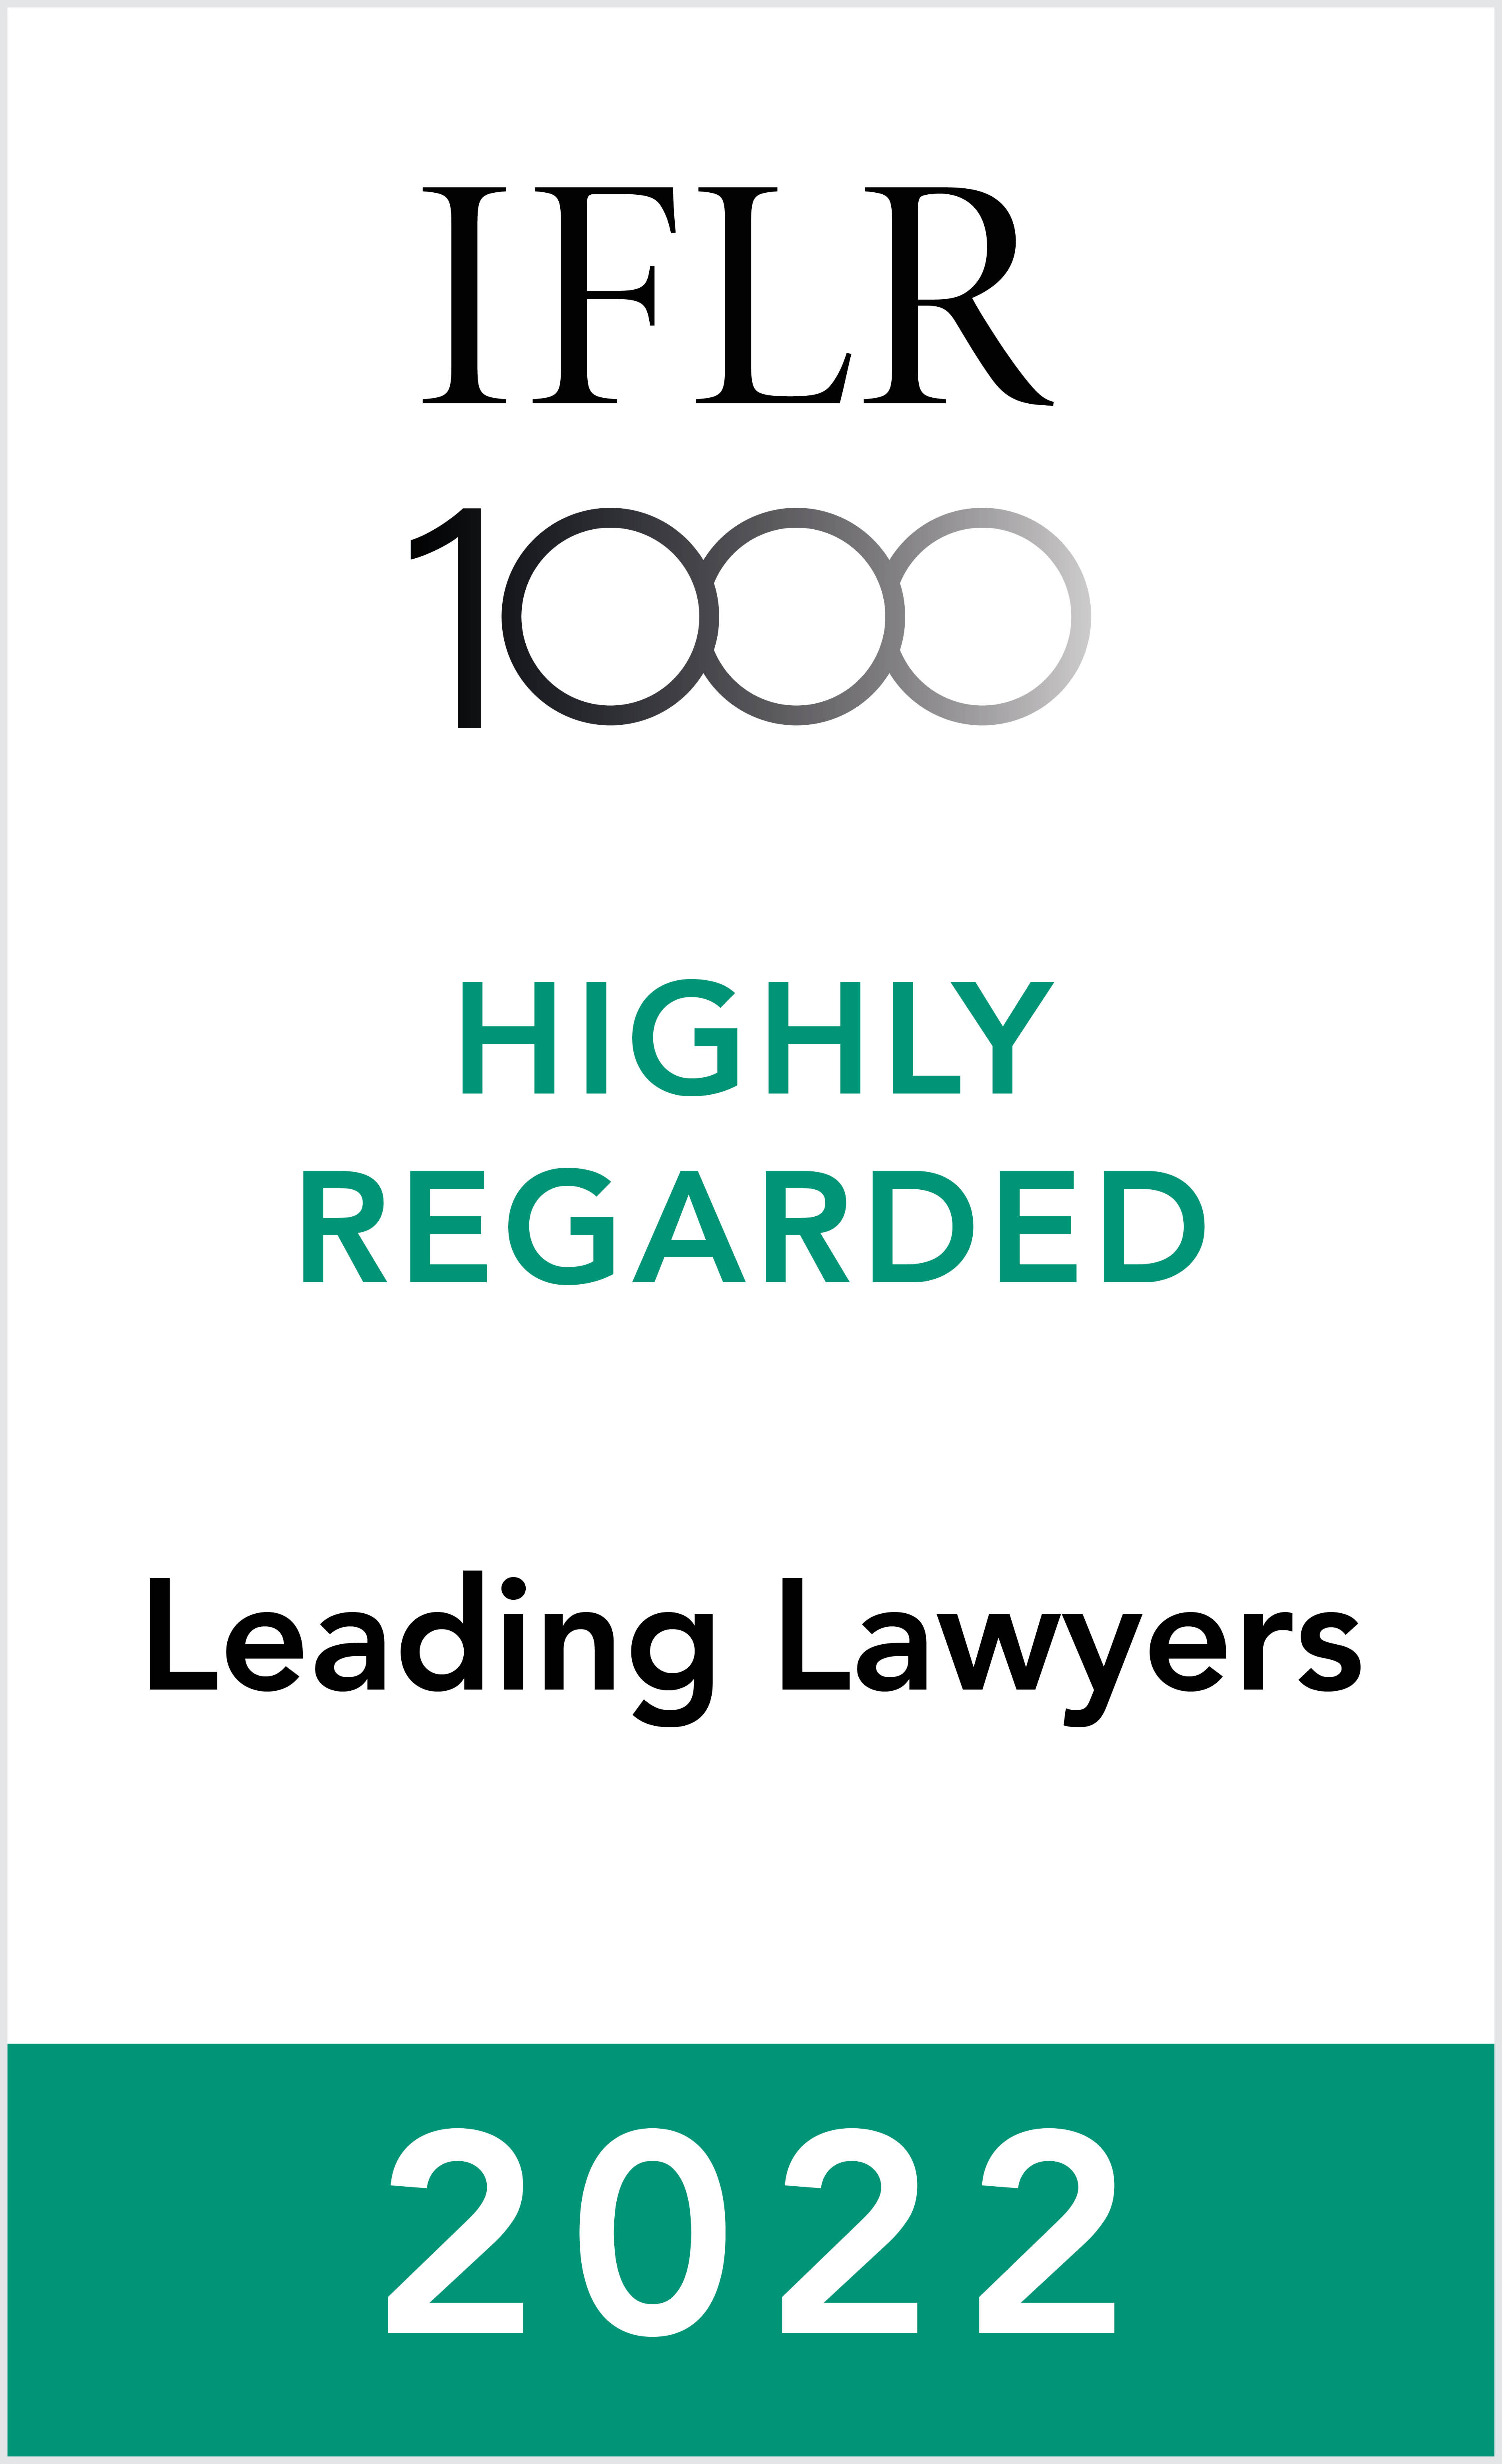 Highly Regarded Leading Lawyer in Capital markets: Equity, M&A, Private equity and Restructuring and insolvency practices by IFLR1000, 2022-23